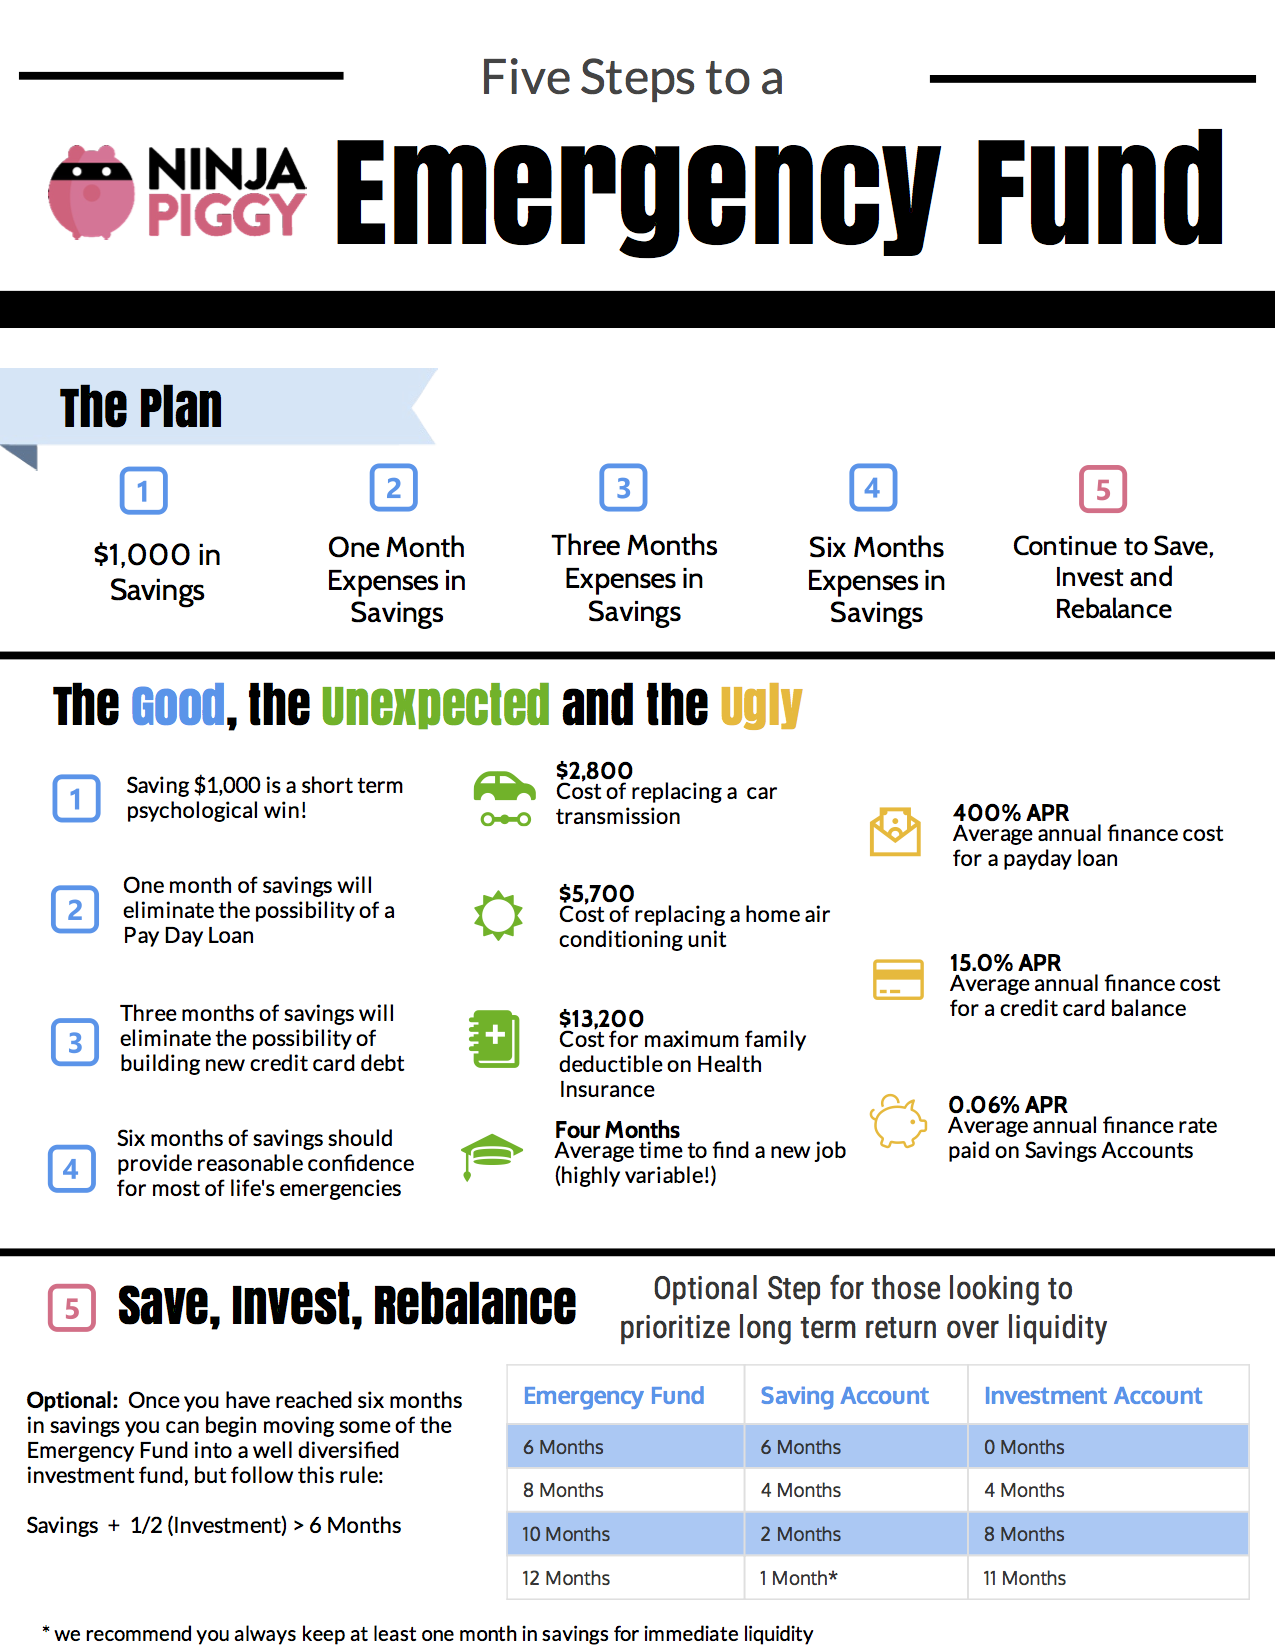 Five Steps to Emergency Fund